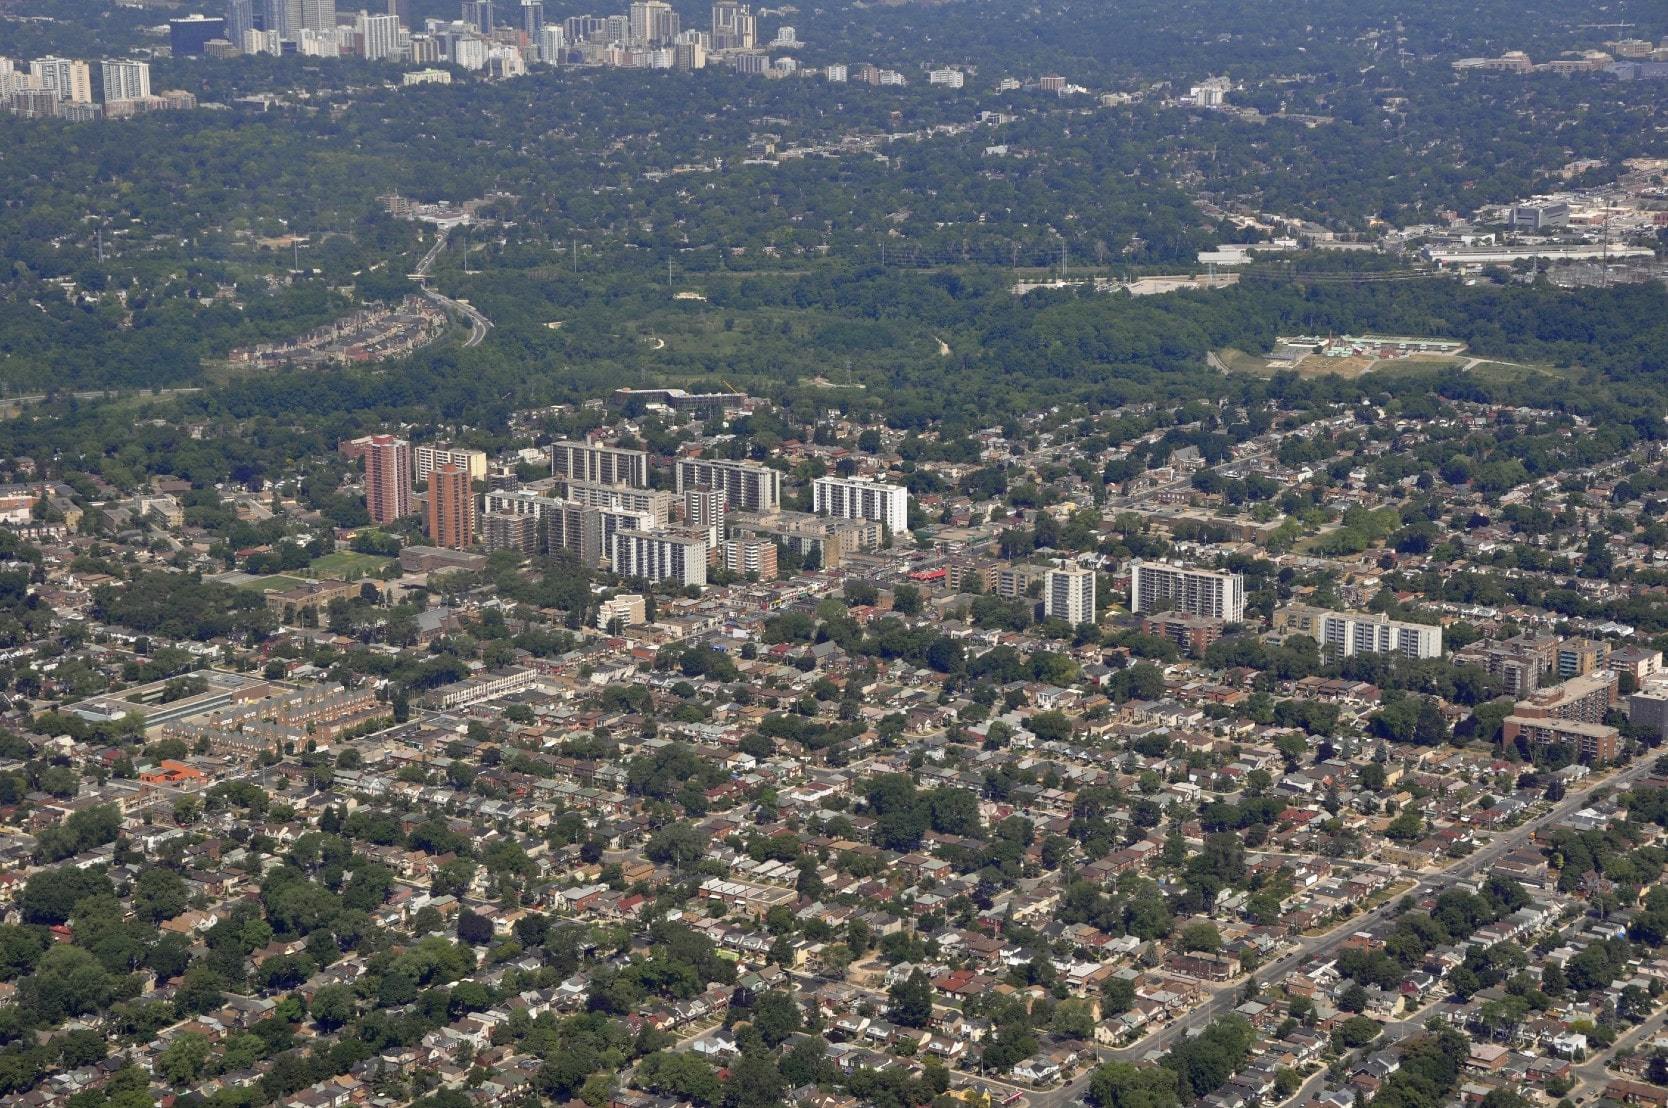 Aerial view of condos and skyline of East York, Ontario